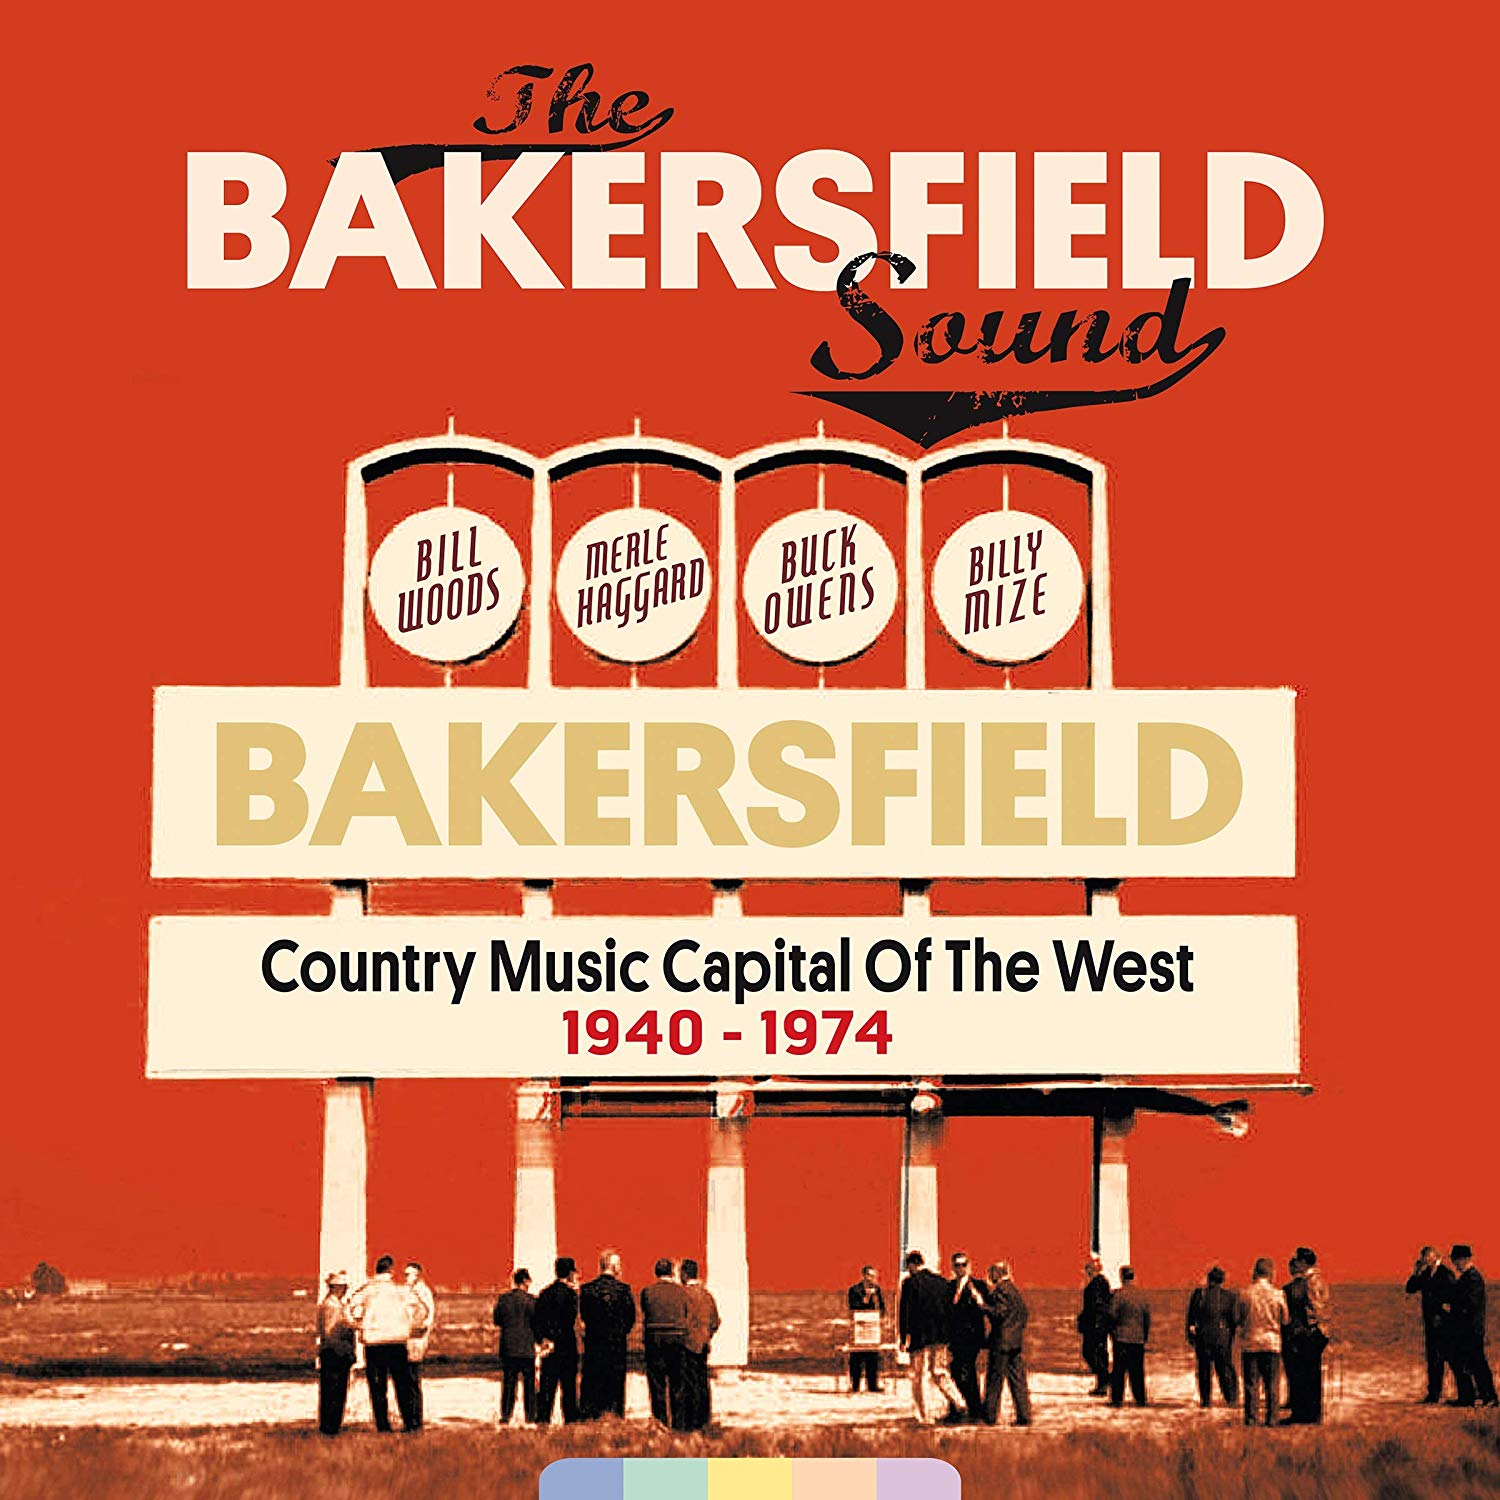 The Bakersfield sound